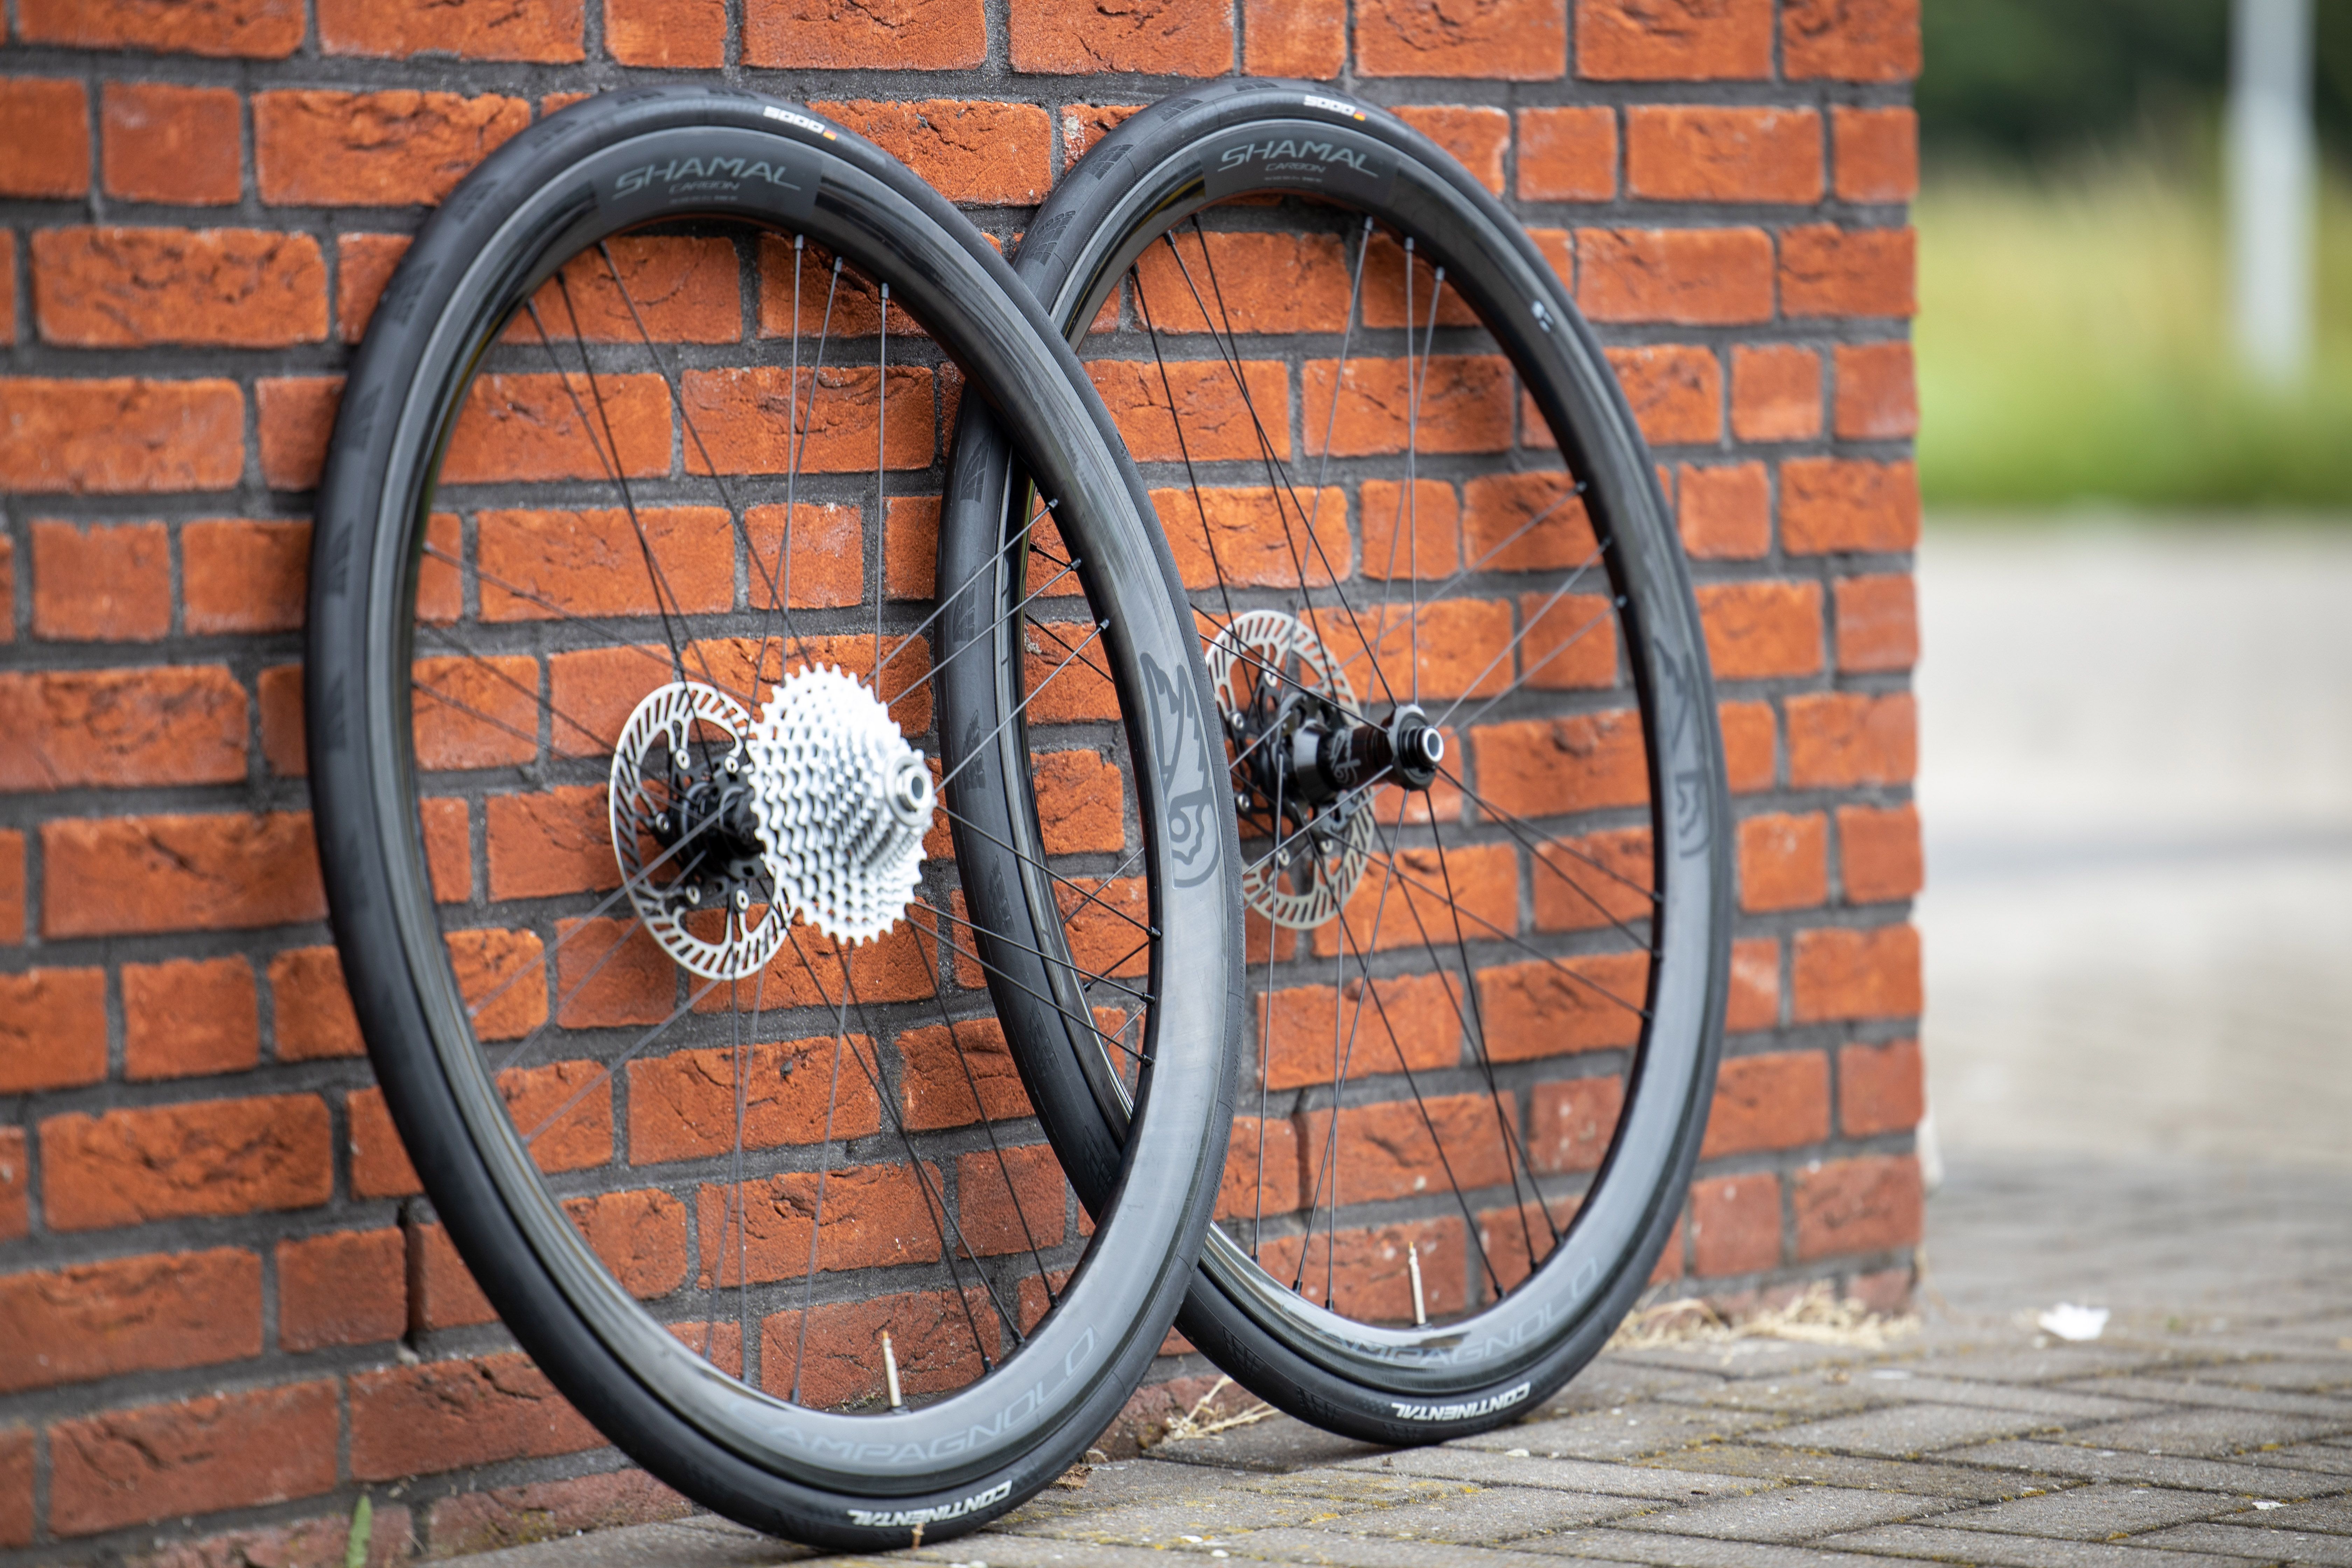 climax Brengen breed Campagnolo lanceert Shamal Carbon wielen - Bicycling